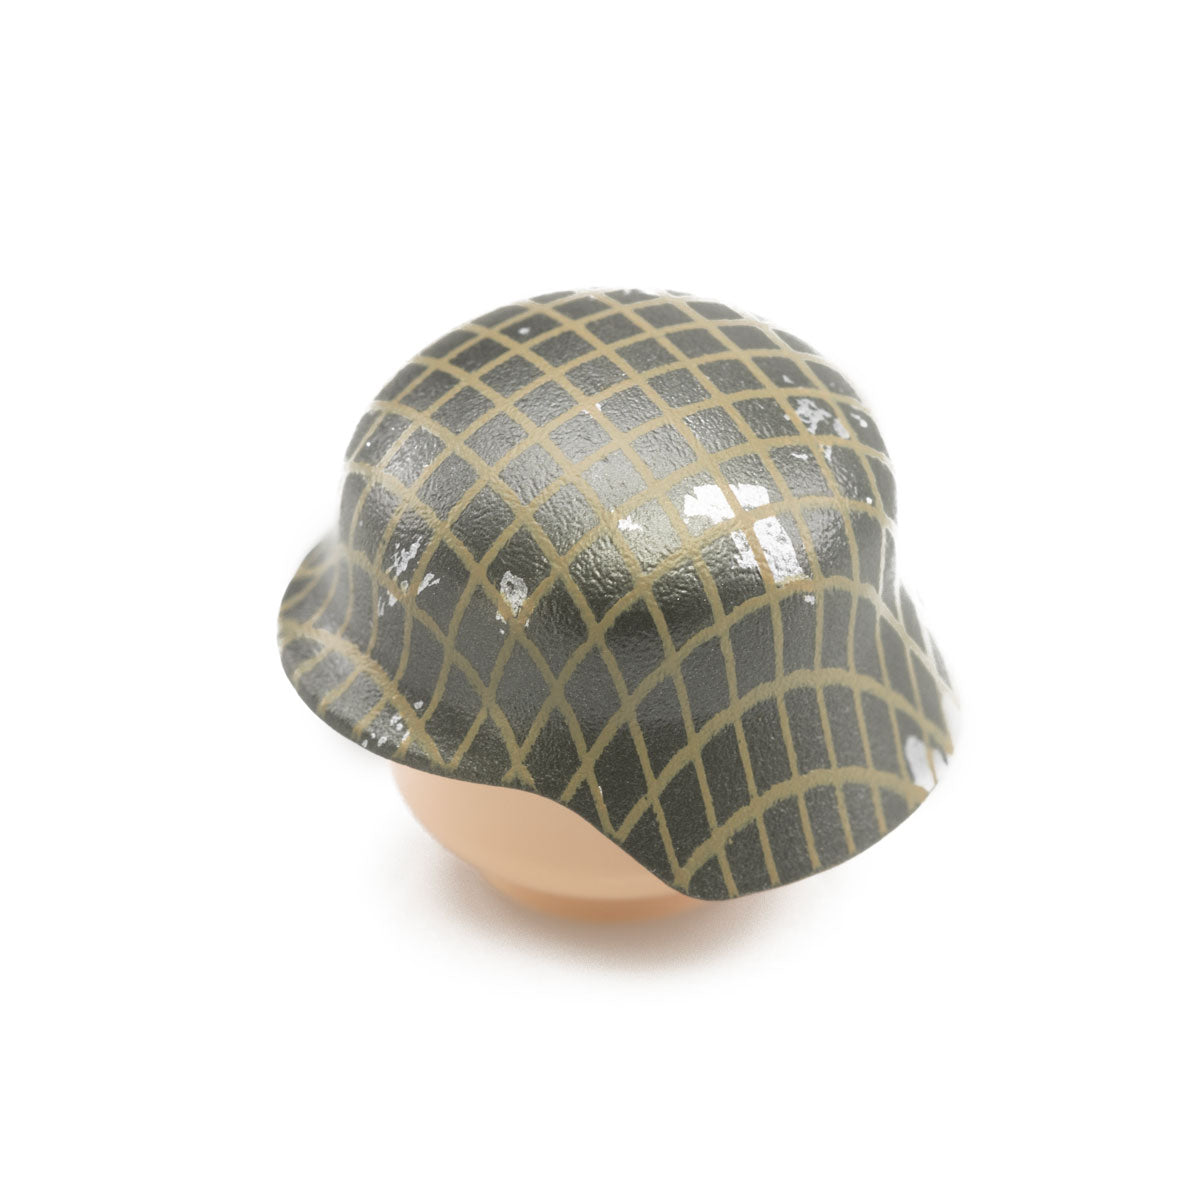 Custom Printed Lego - Weathered/Netted Stahlhelm - The Minifig Co.